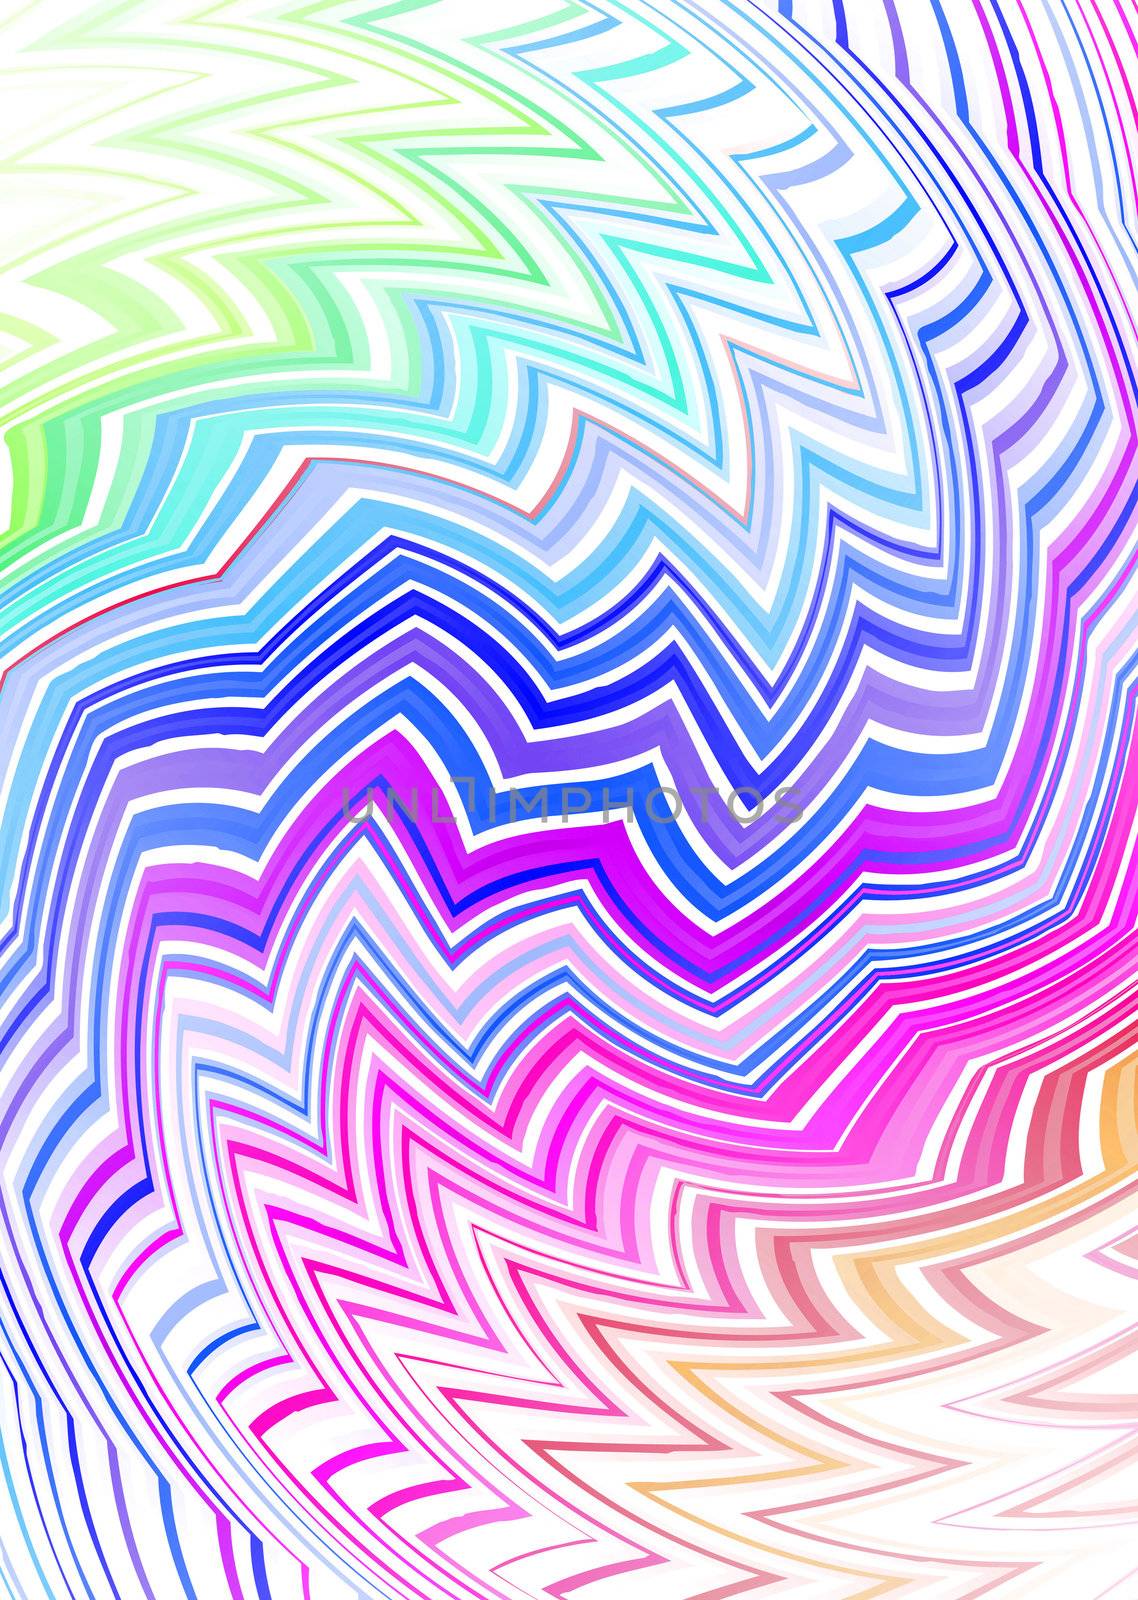 Tattoo inspired rainbow background that would make an ideal desktop